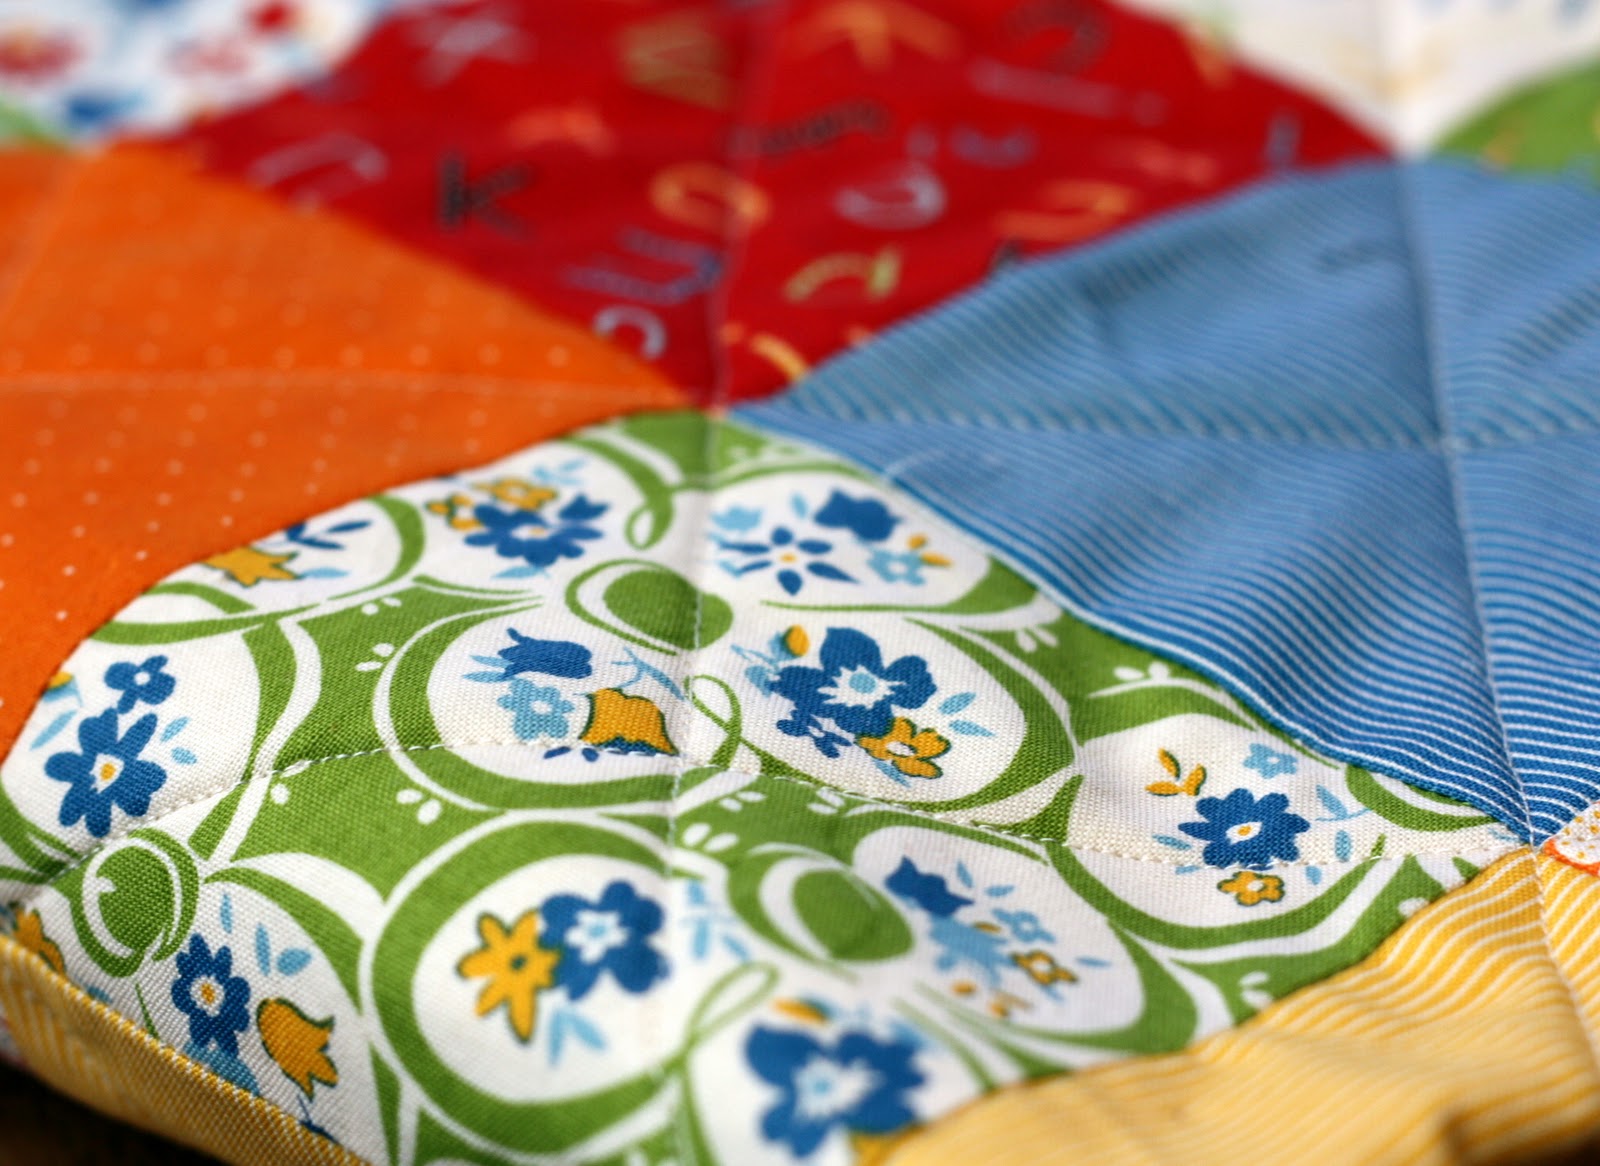 All About Pin Basting a Quilt - New Quilters